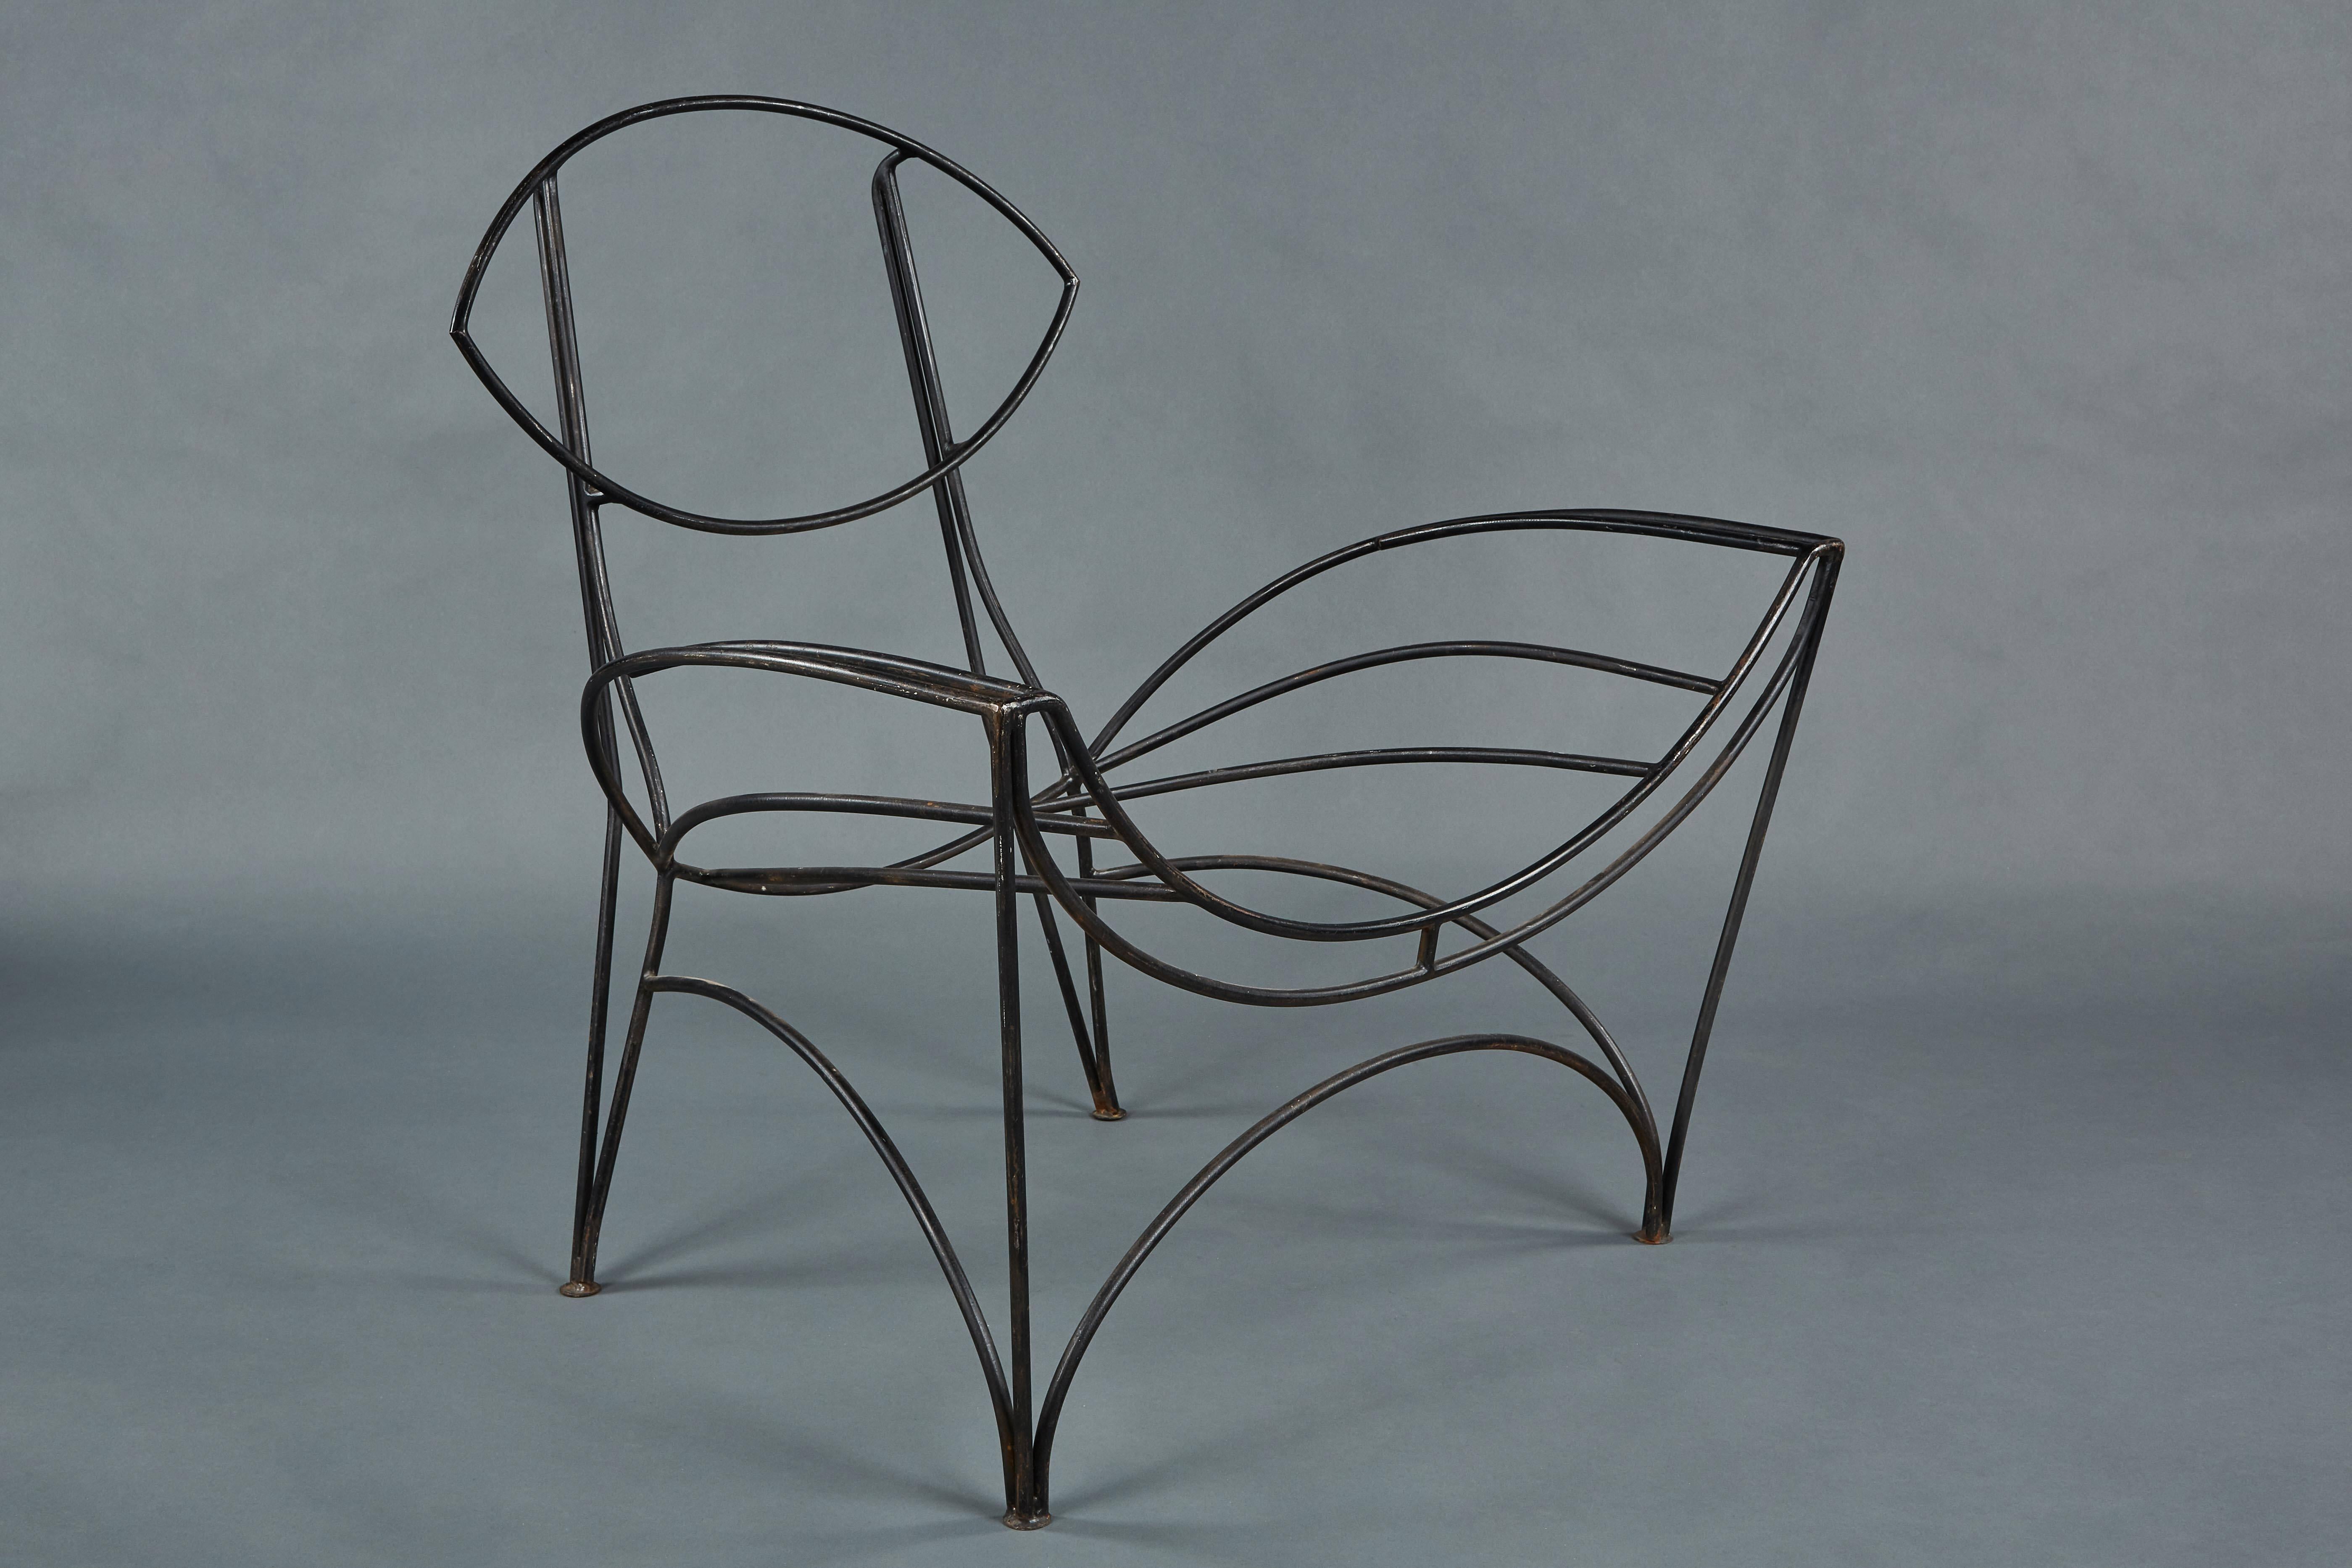 “Fat” iron chair by Tom Dixon. Frame stands alone as a very striking sculpture of painted iron.